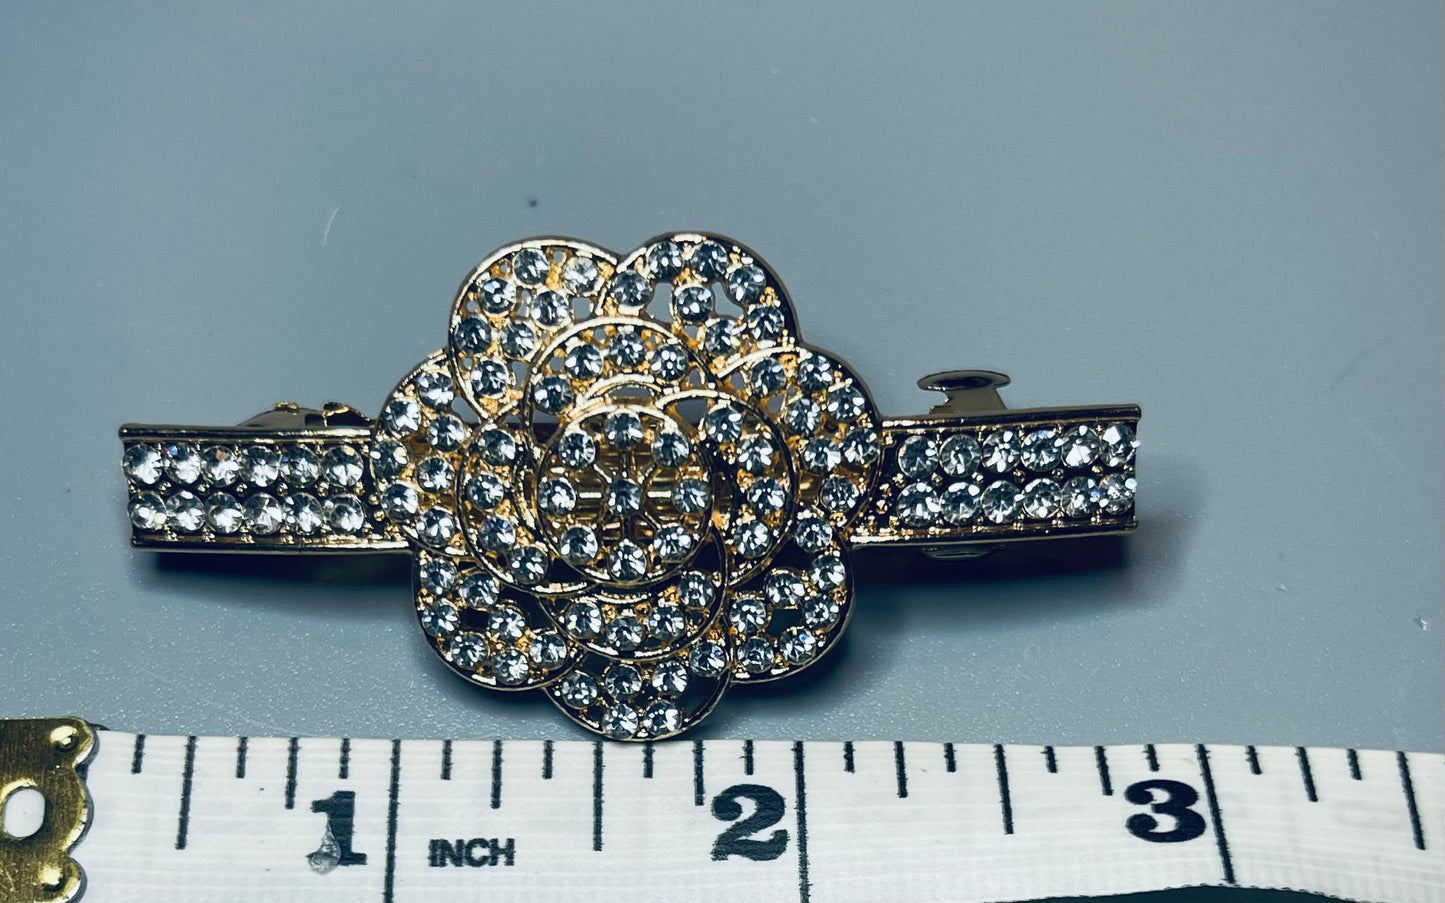 Clear flower Crystal rhinestone barrette approximately 3.0” gold tone formal hair accessories gift wedding bridesmaid prom birthday mother of bride groom